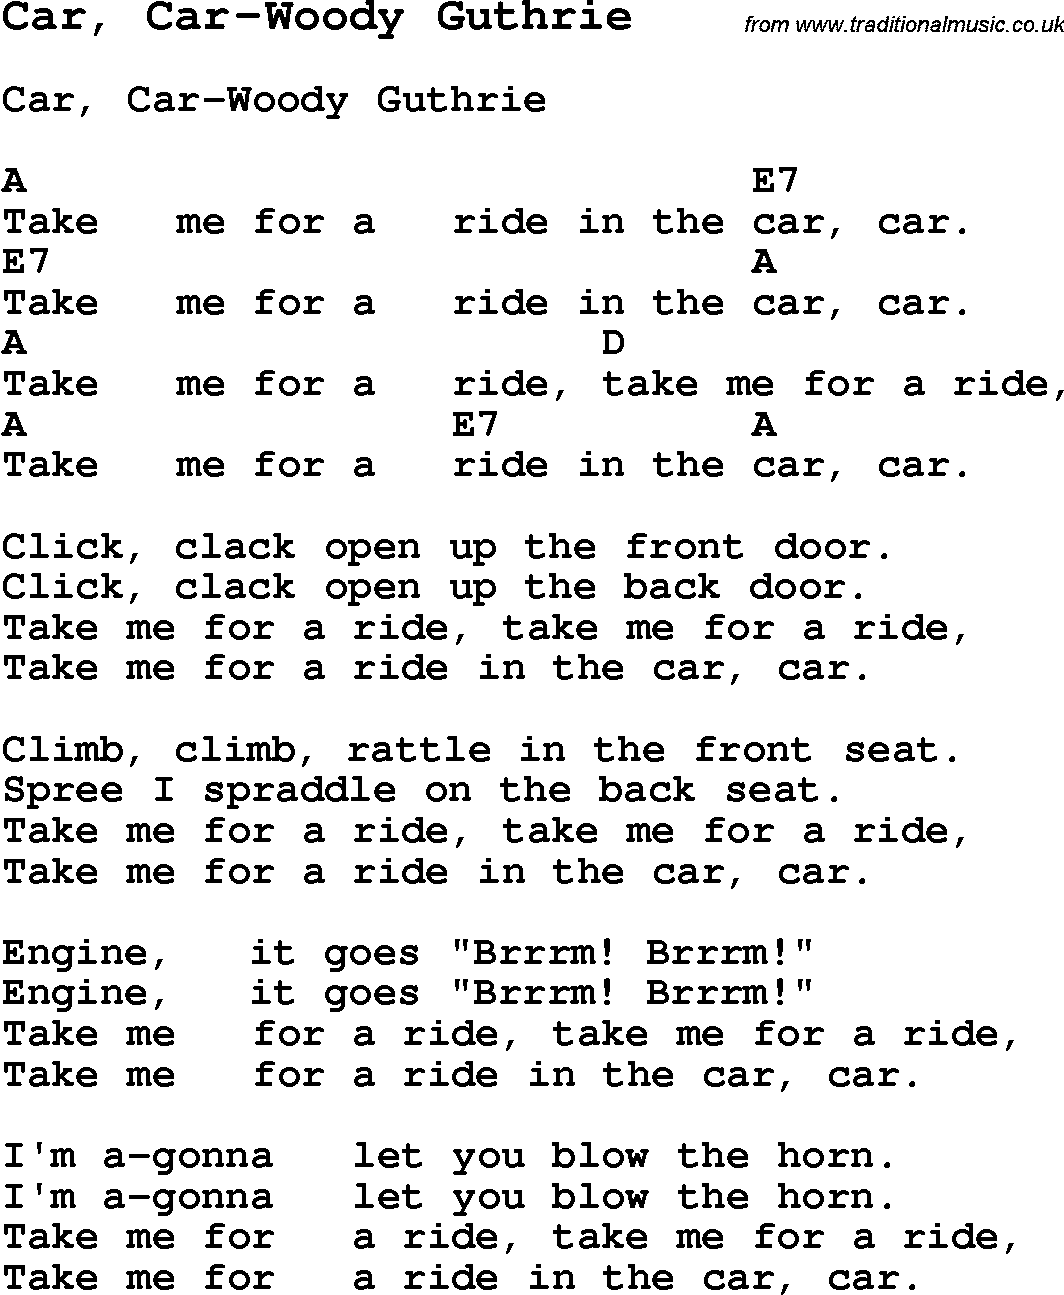 Summer-Camp Song, Car, Car-Woody Guthrie, with lyrics and chords for Ukulele, Guitar Banjo etc.